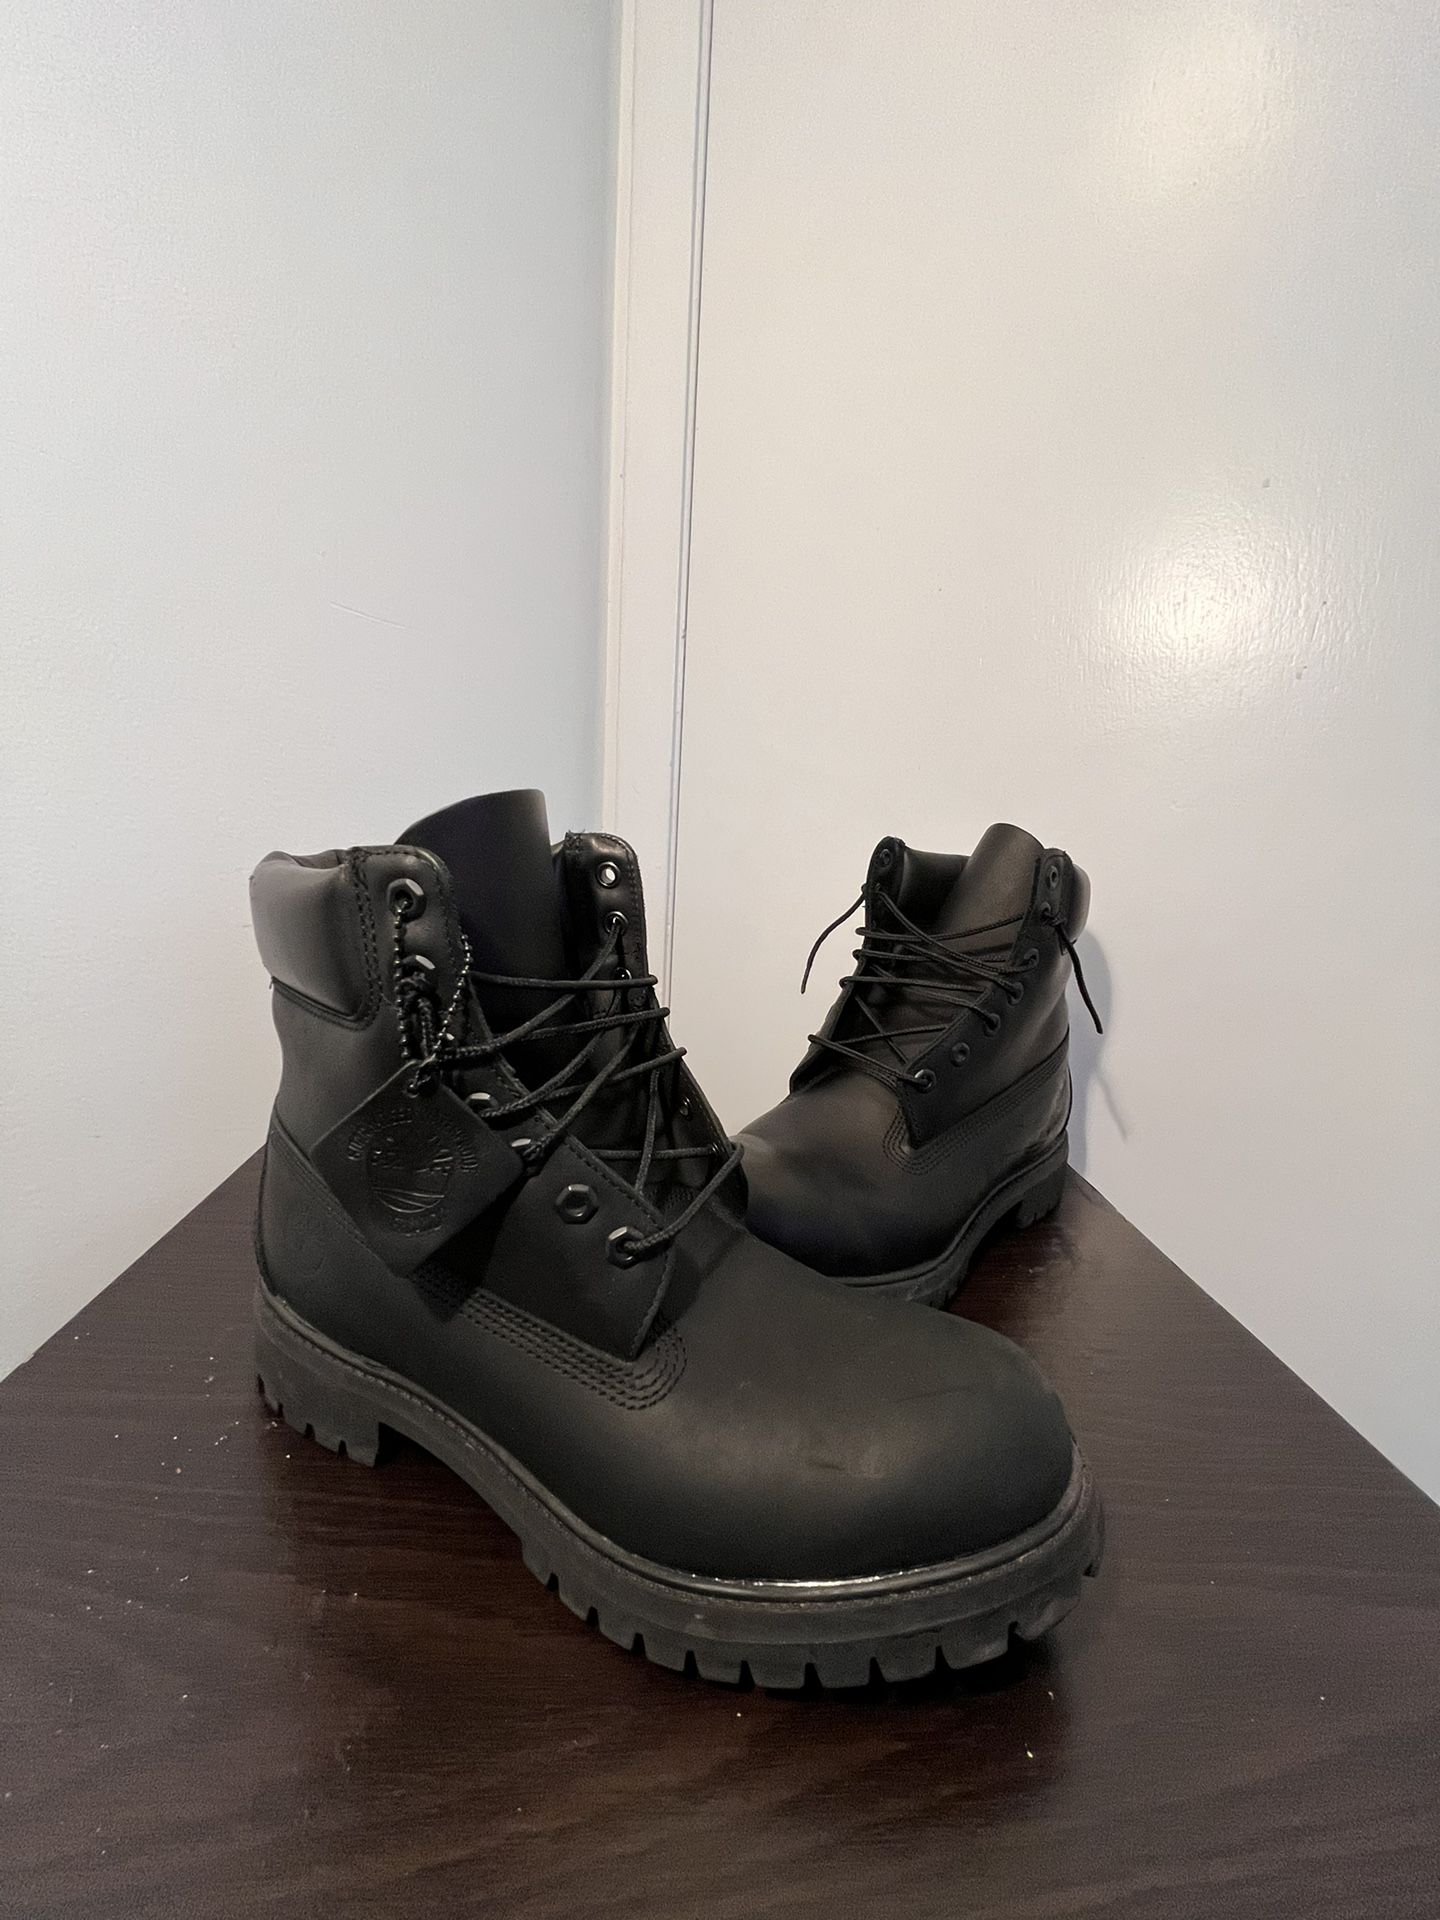 Black Timberland Boots for Sale in IL - OfferUp